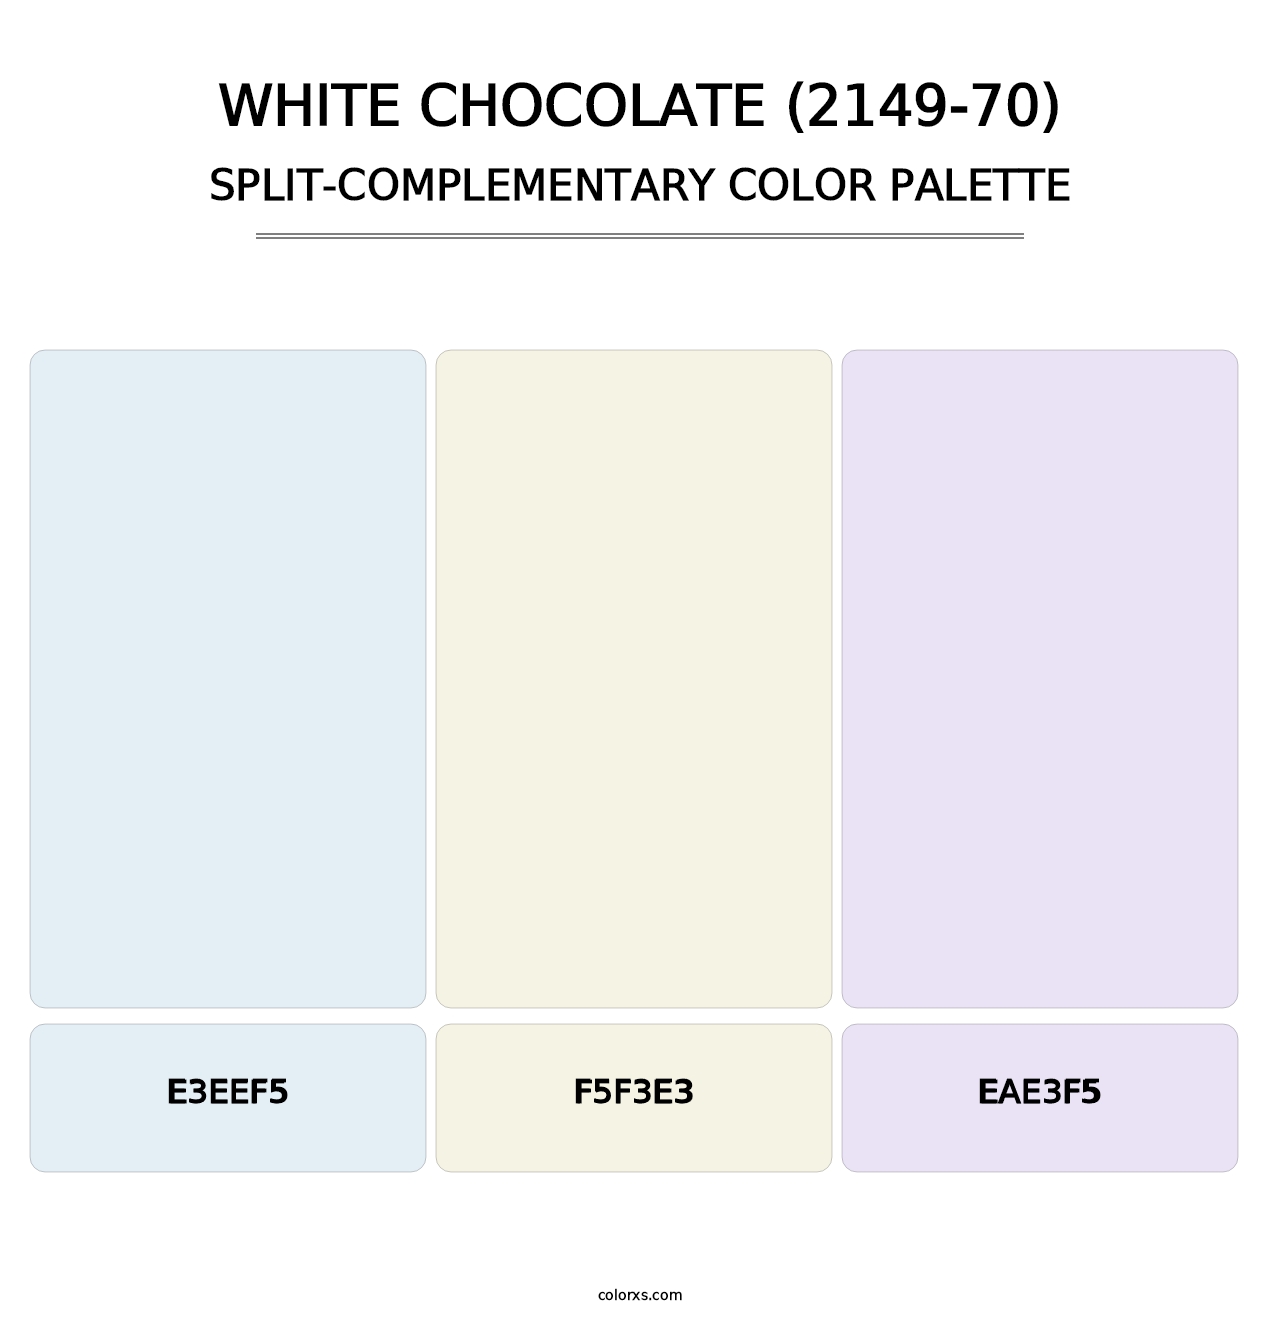 White Chocolate (2149-70) - Split-Complementary Color Palette